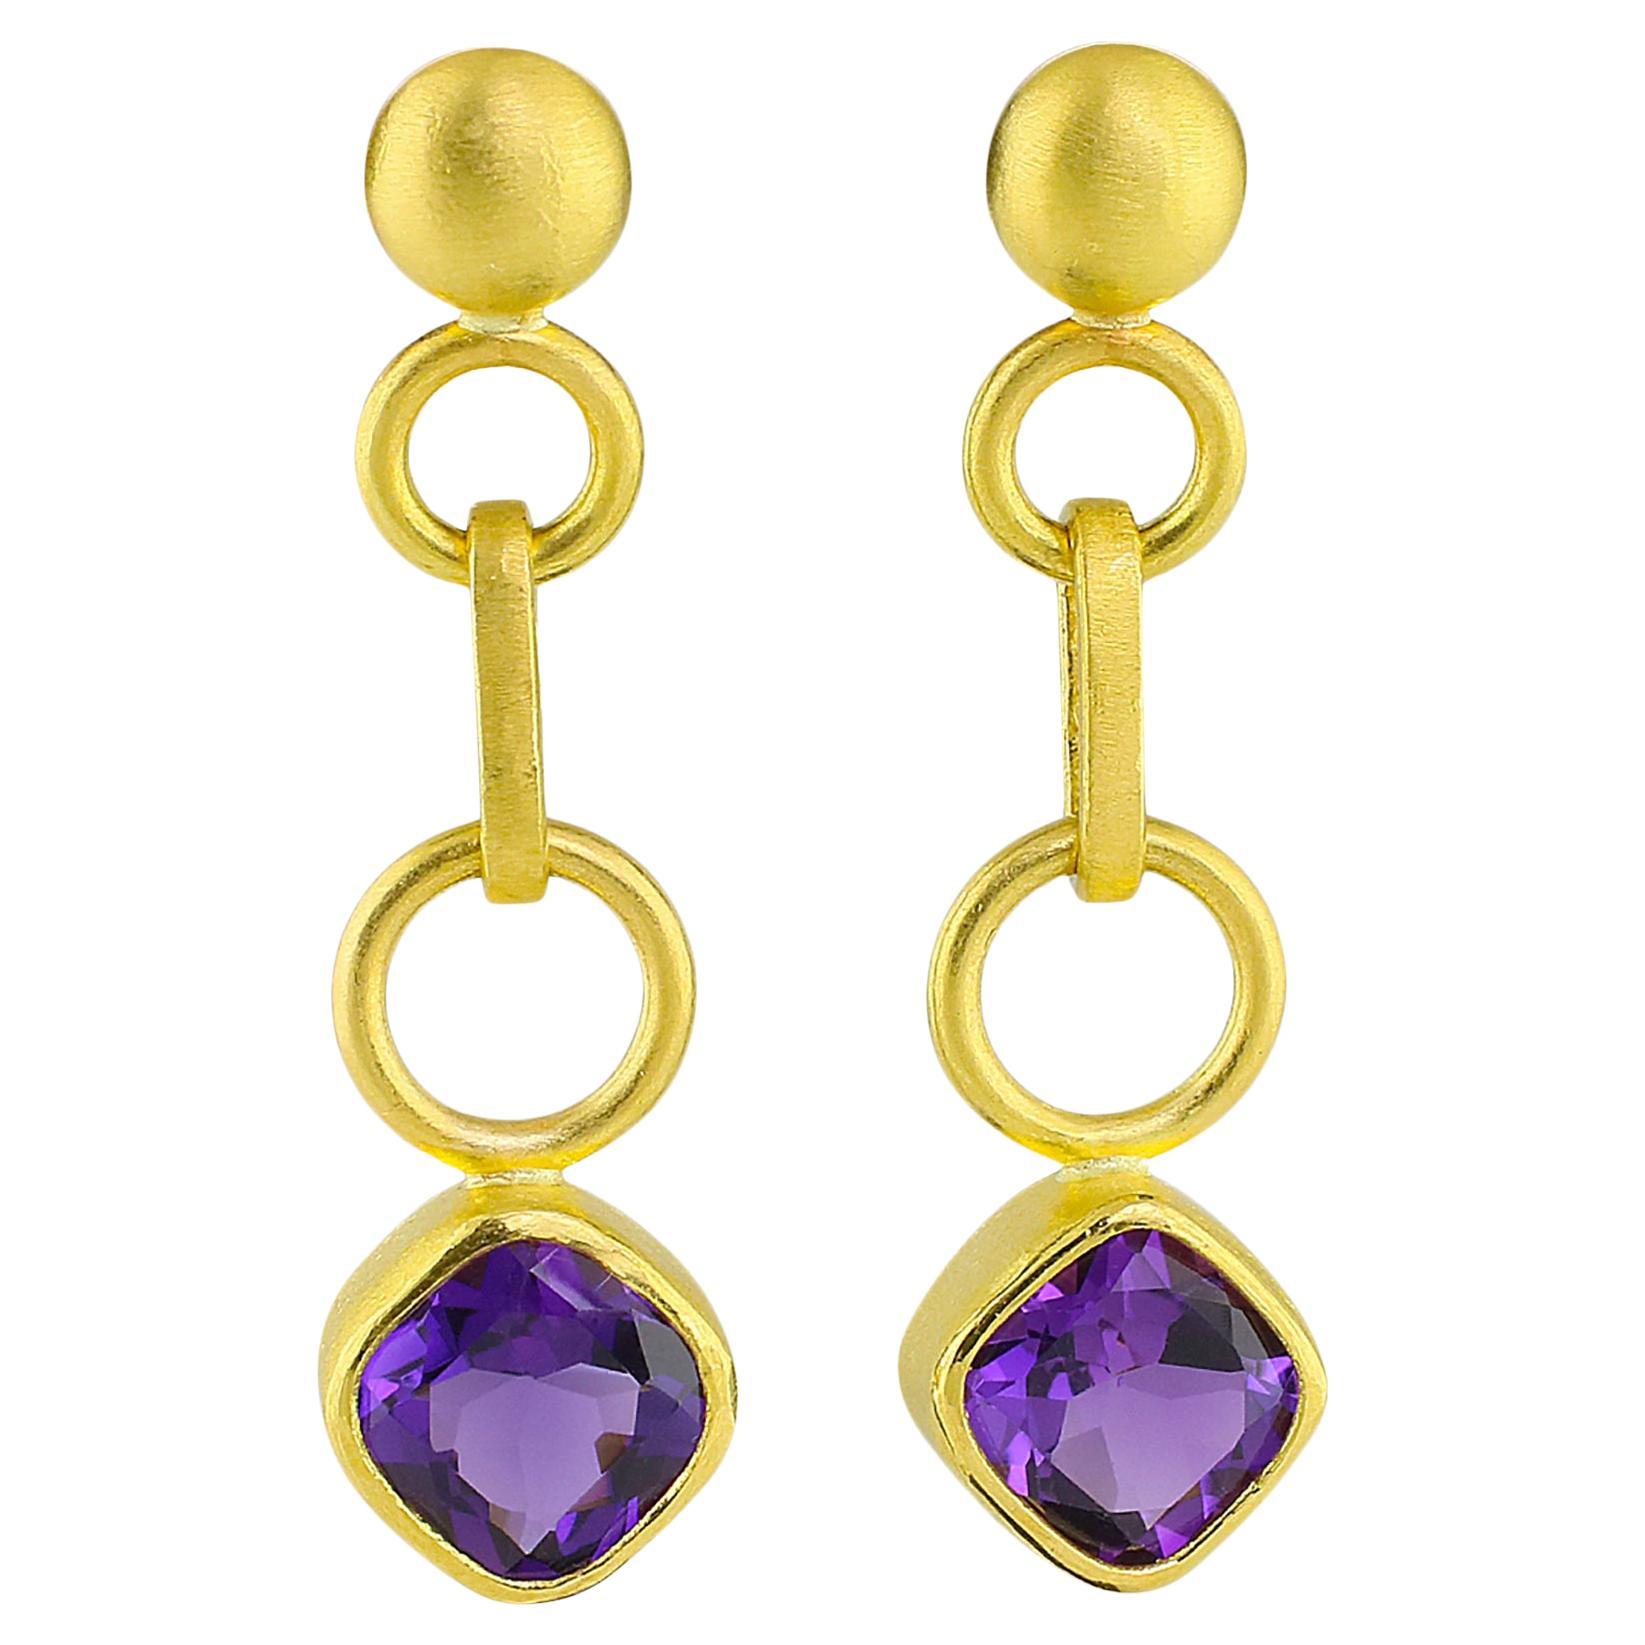 PHILIPPE SPENCER Pure 22K Gold & Amethyst Dangling Earrings For Sale